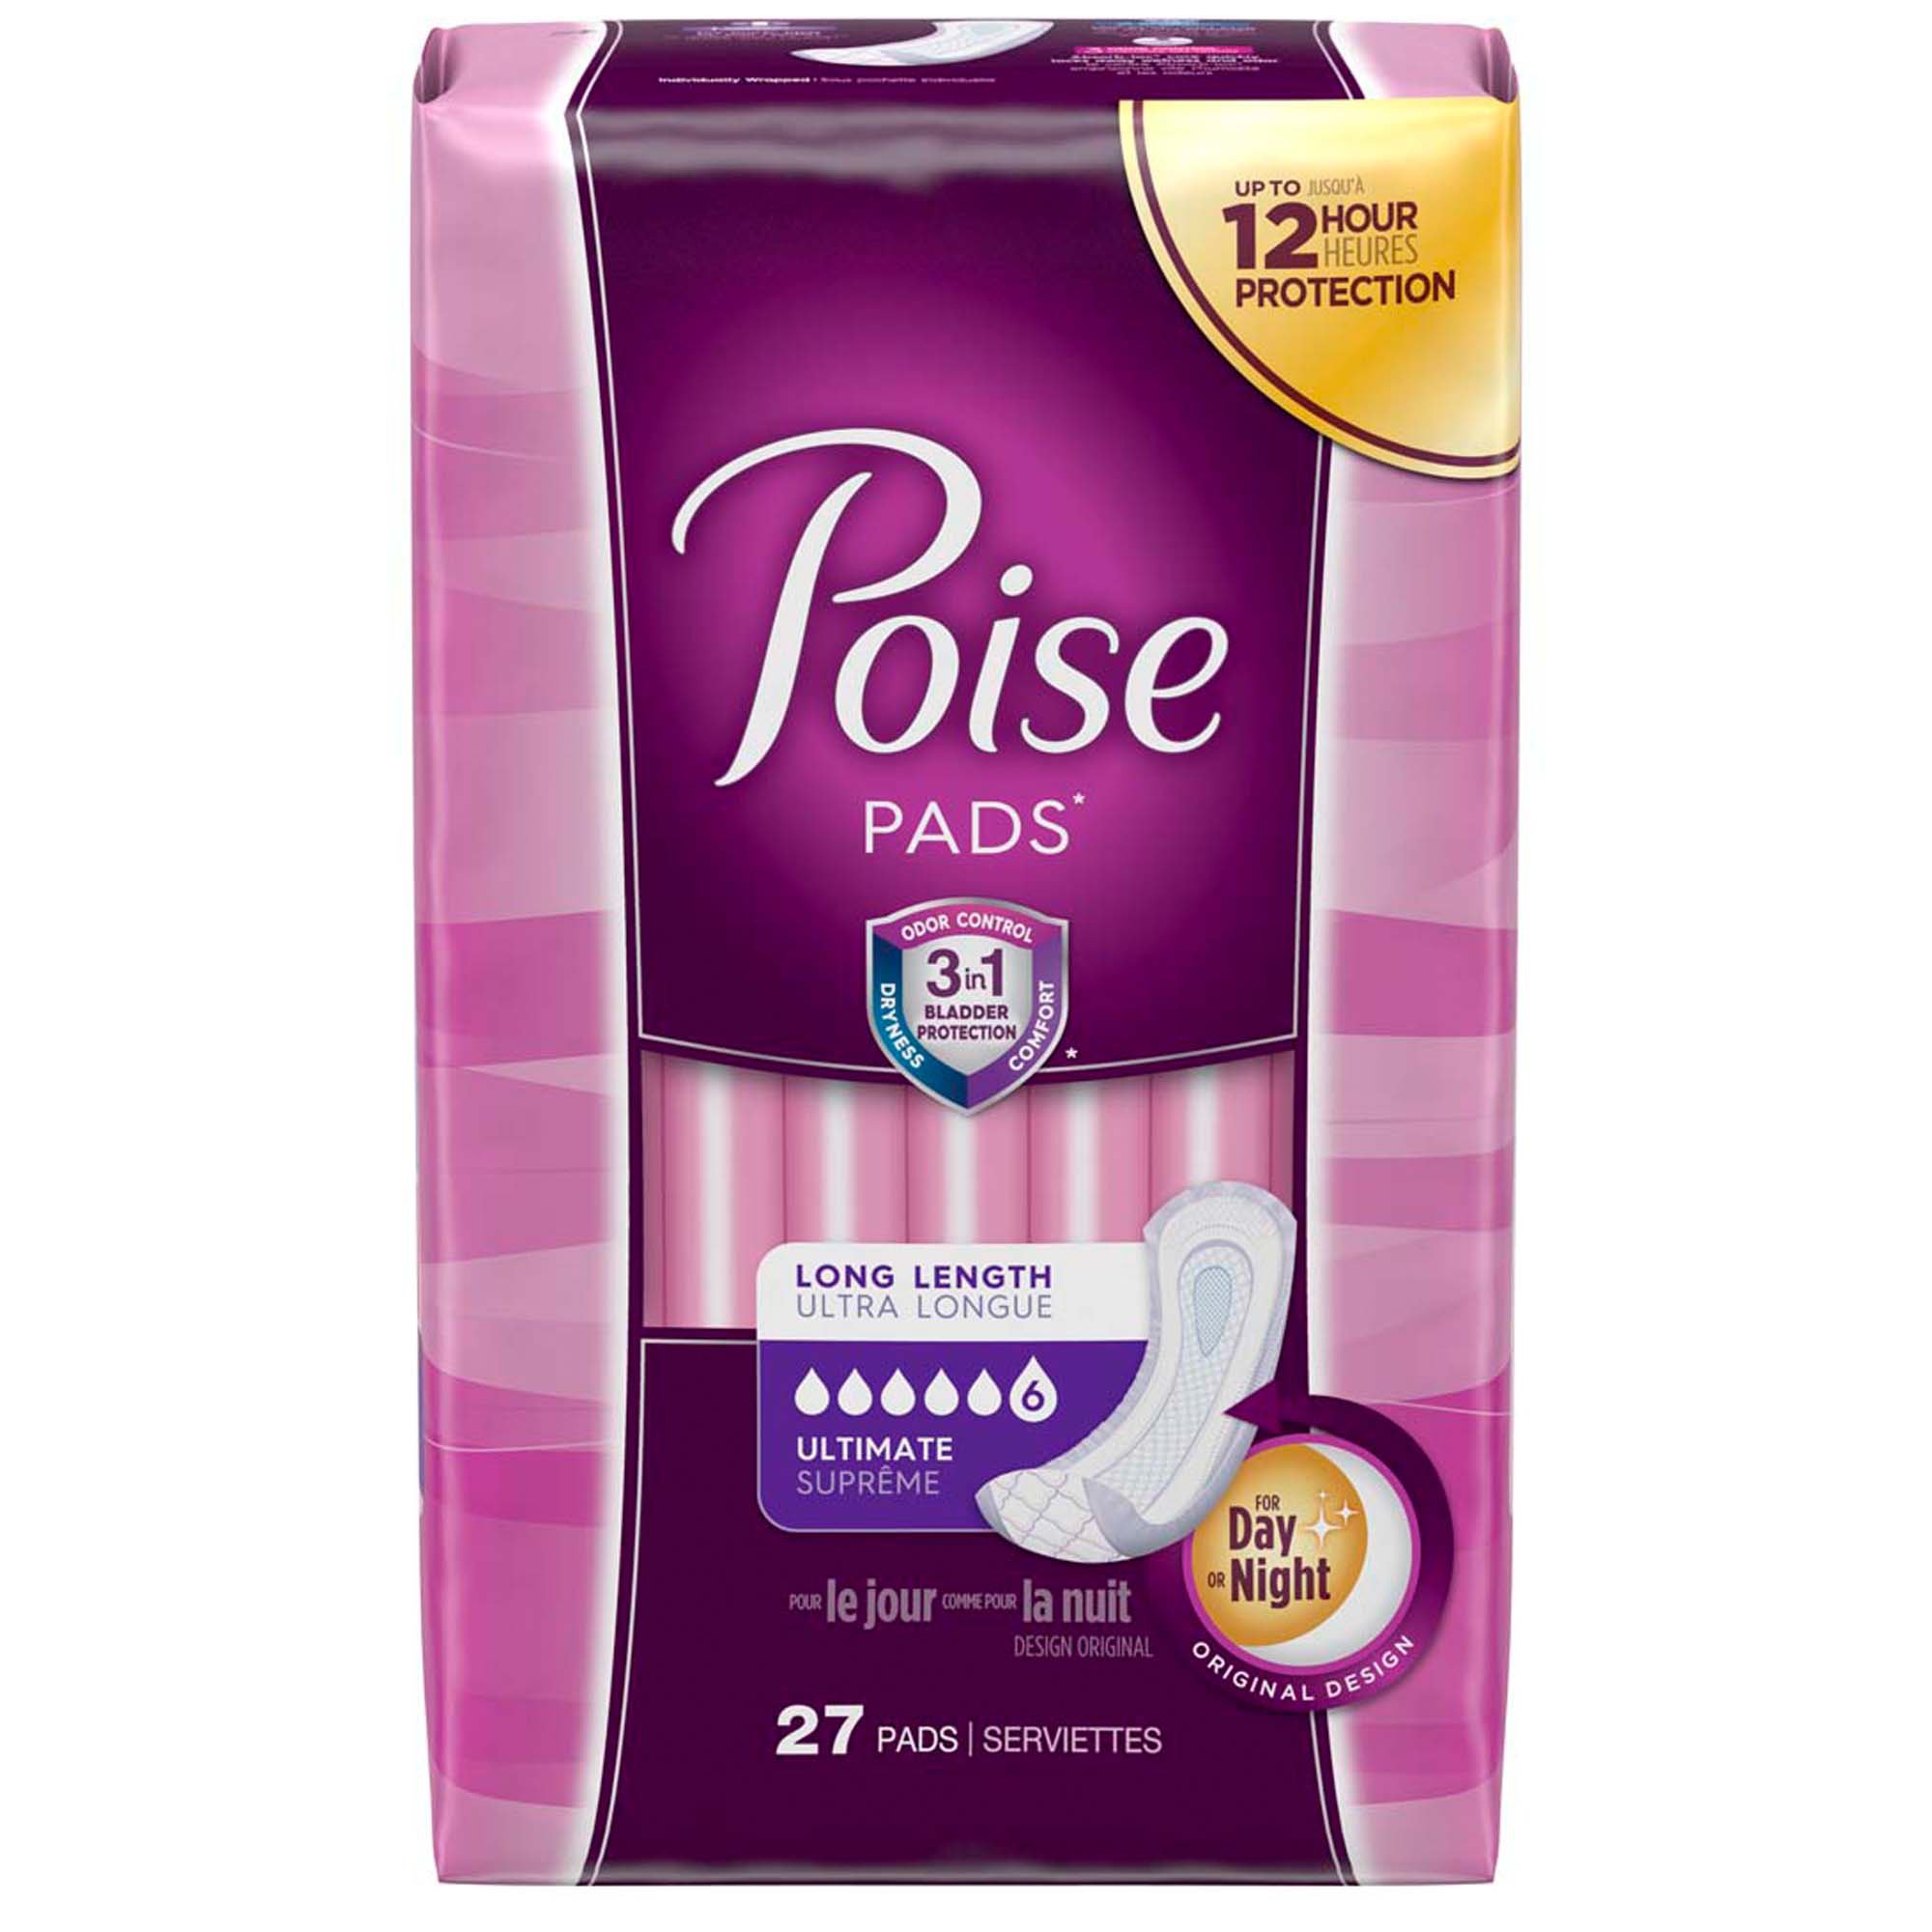 Poise Ultimate Supreme Bladder Control Pad, 15.9-Inch Length